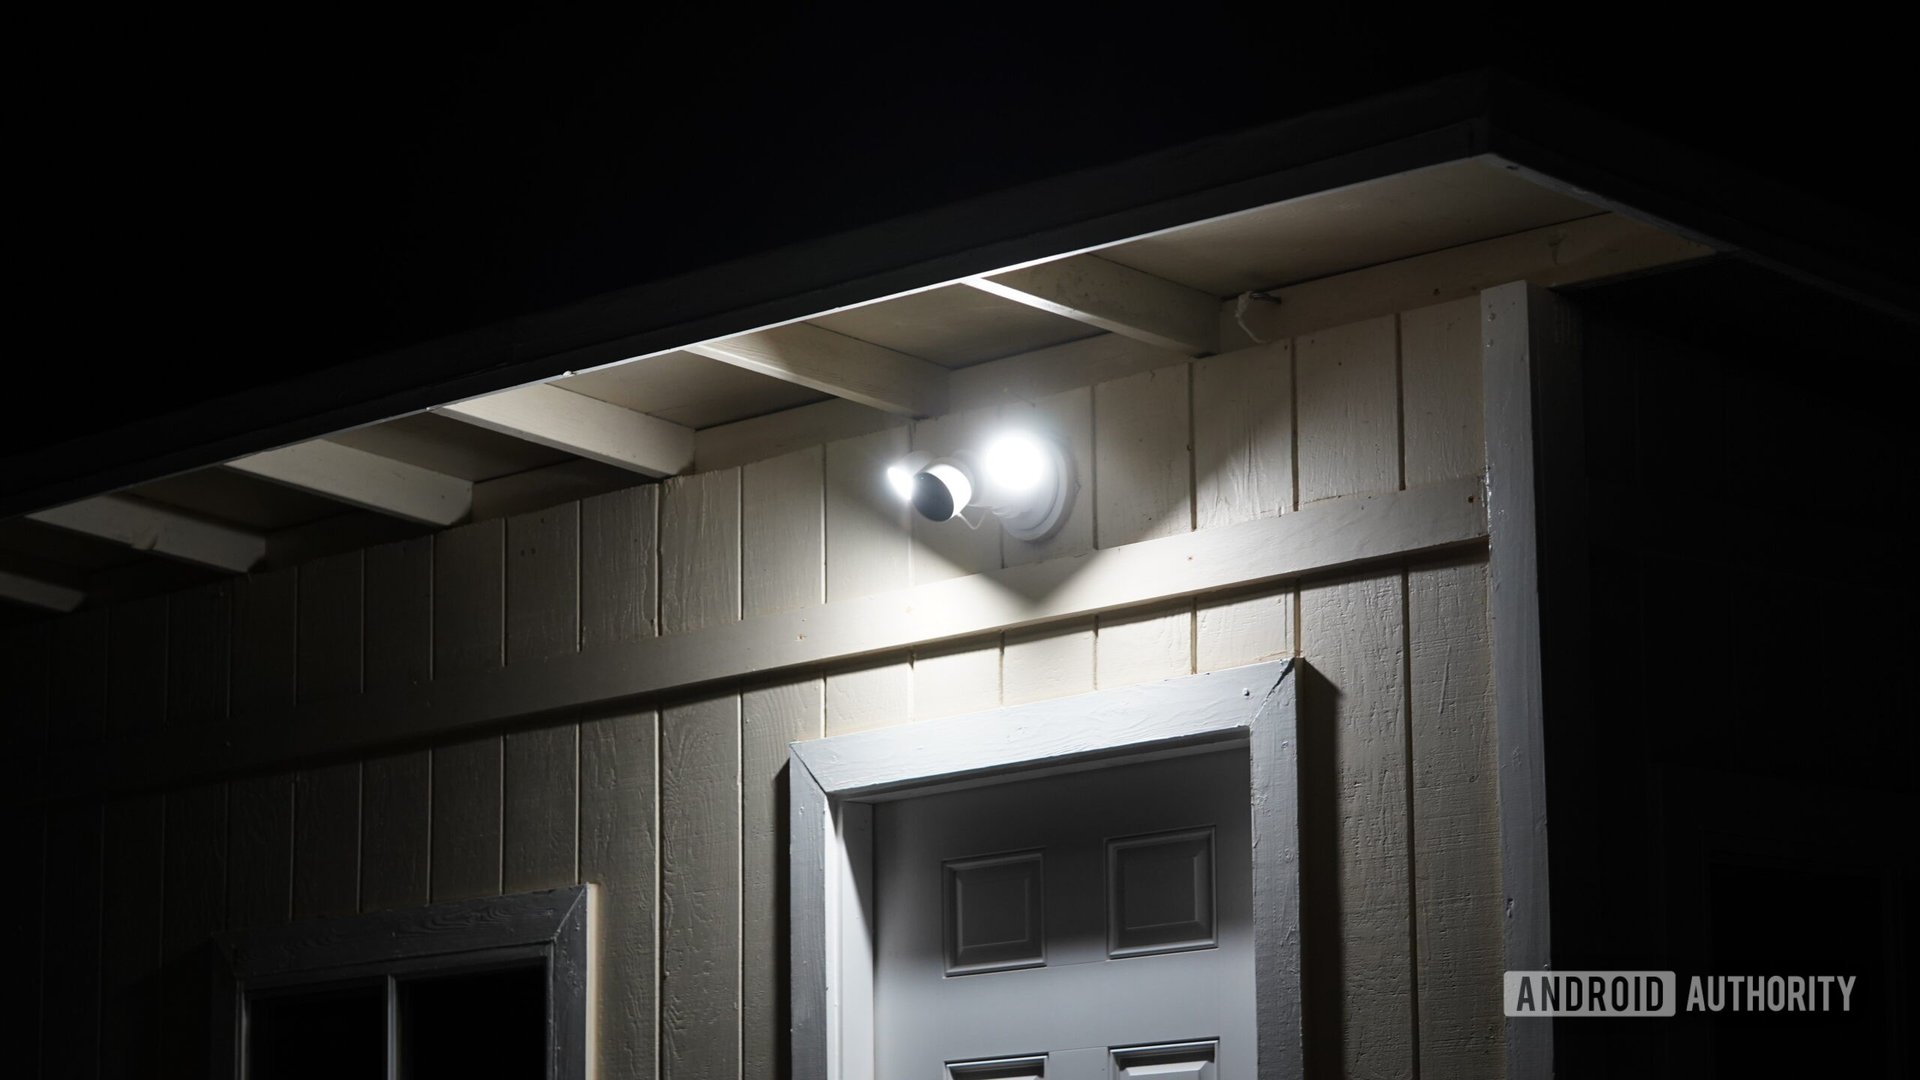 A Google Nest With Floodlight shines from a users' shed.